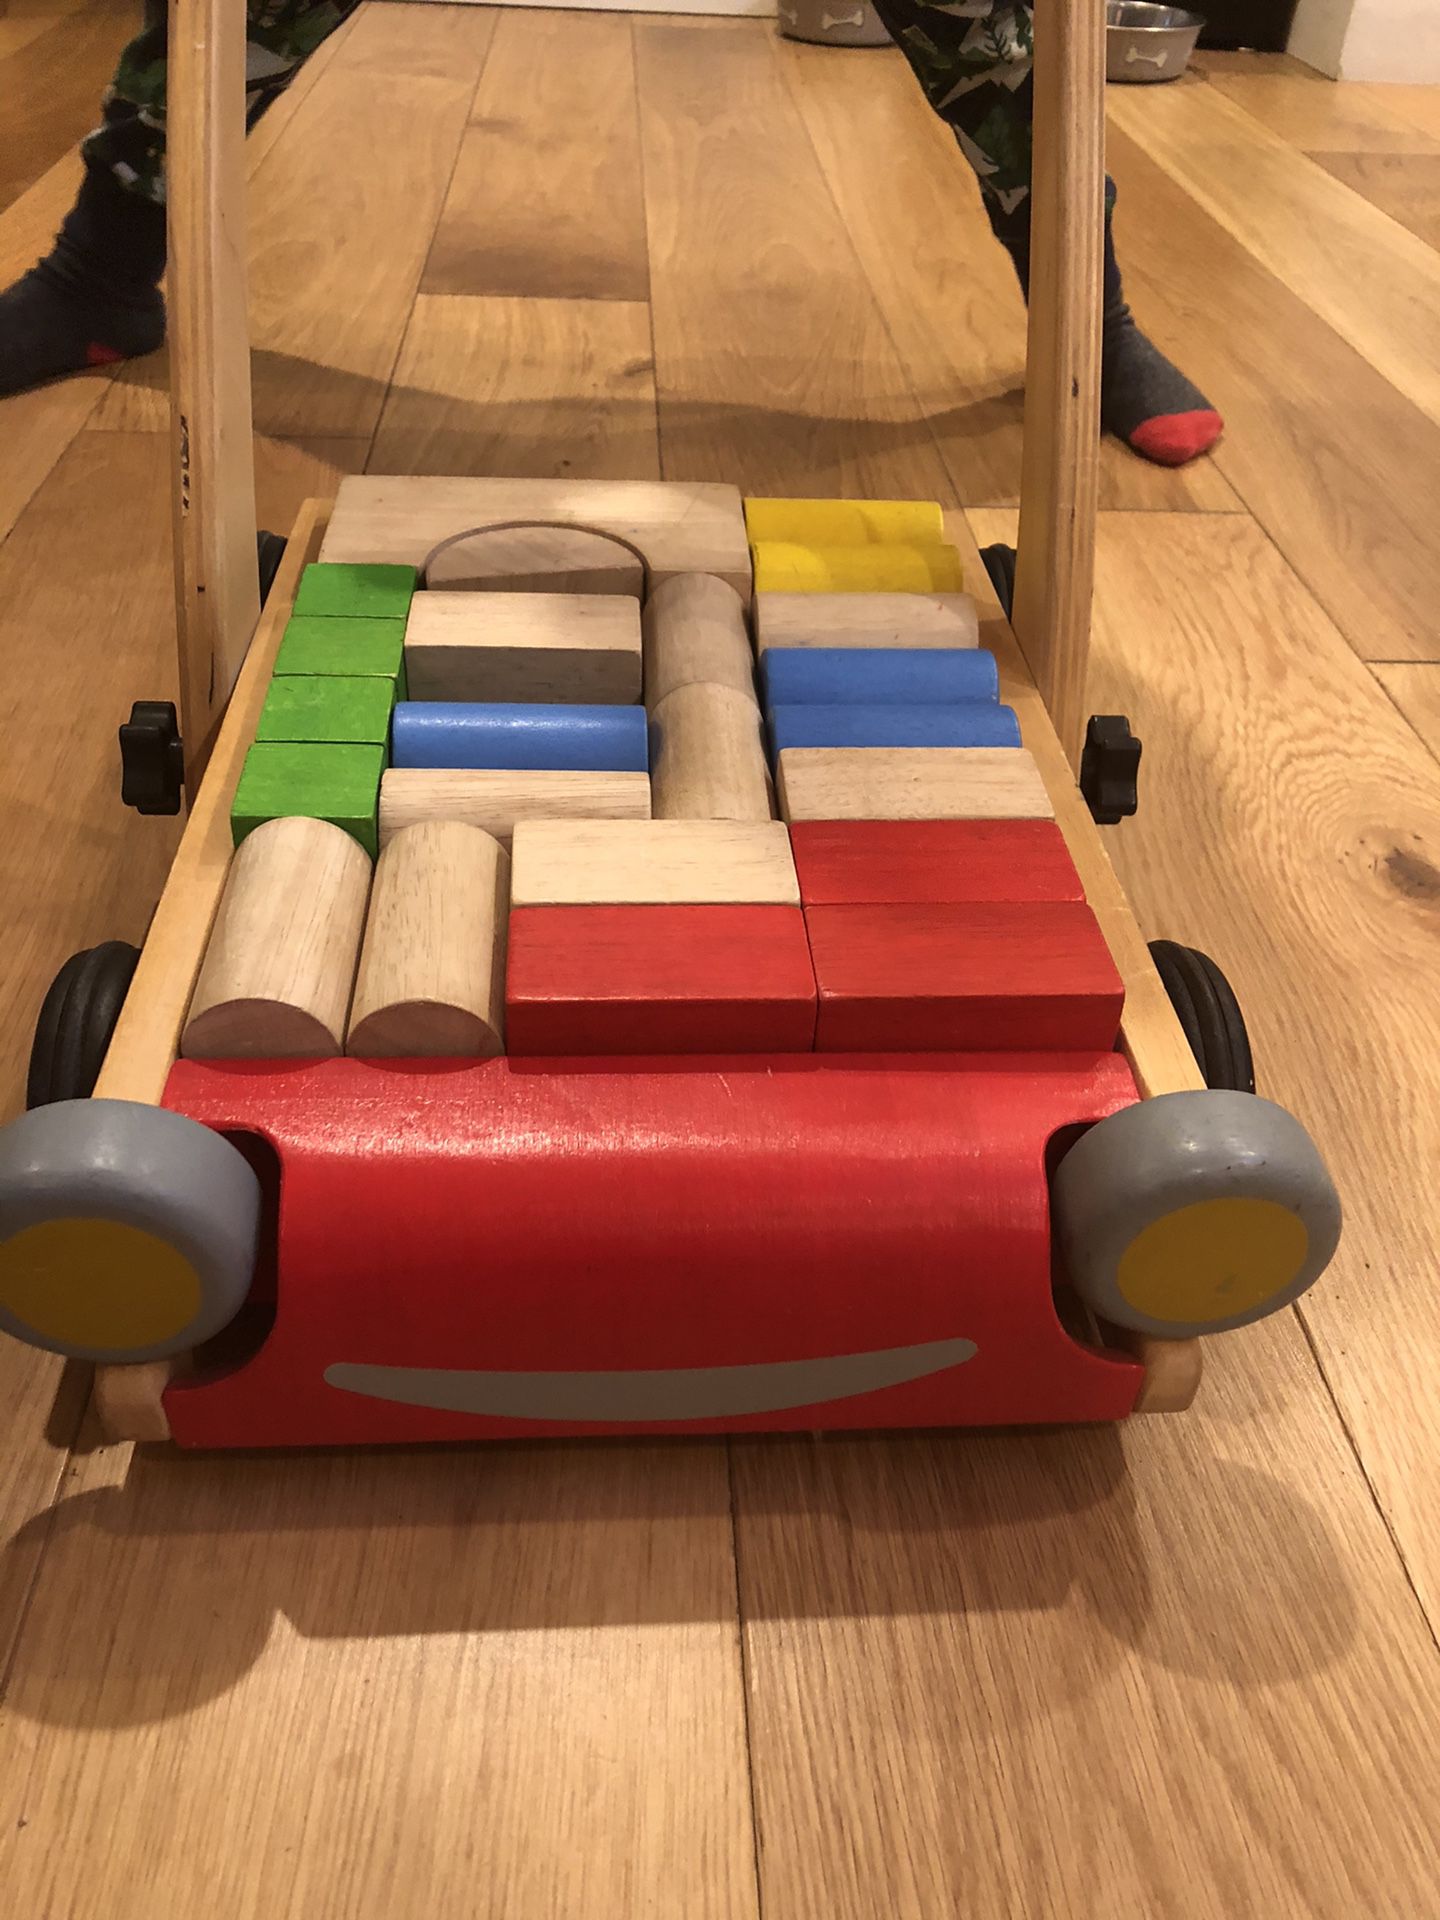 PLAN TOYS wagon and wooden blocks